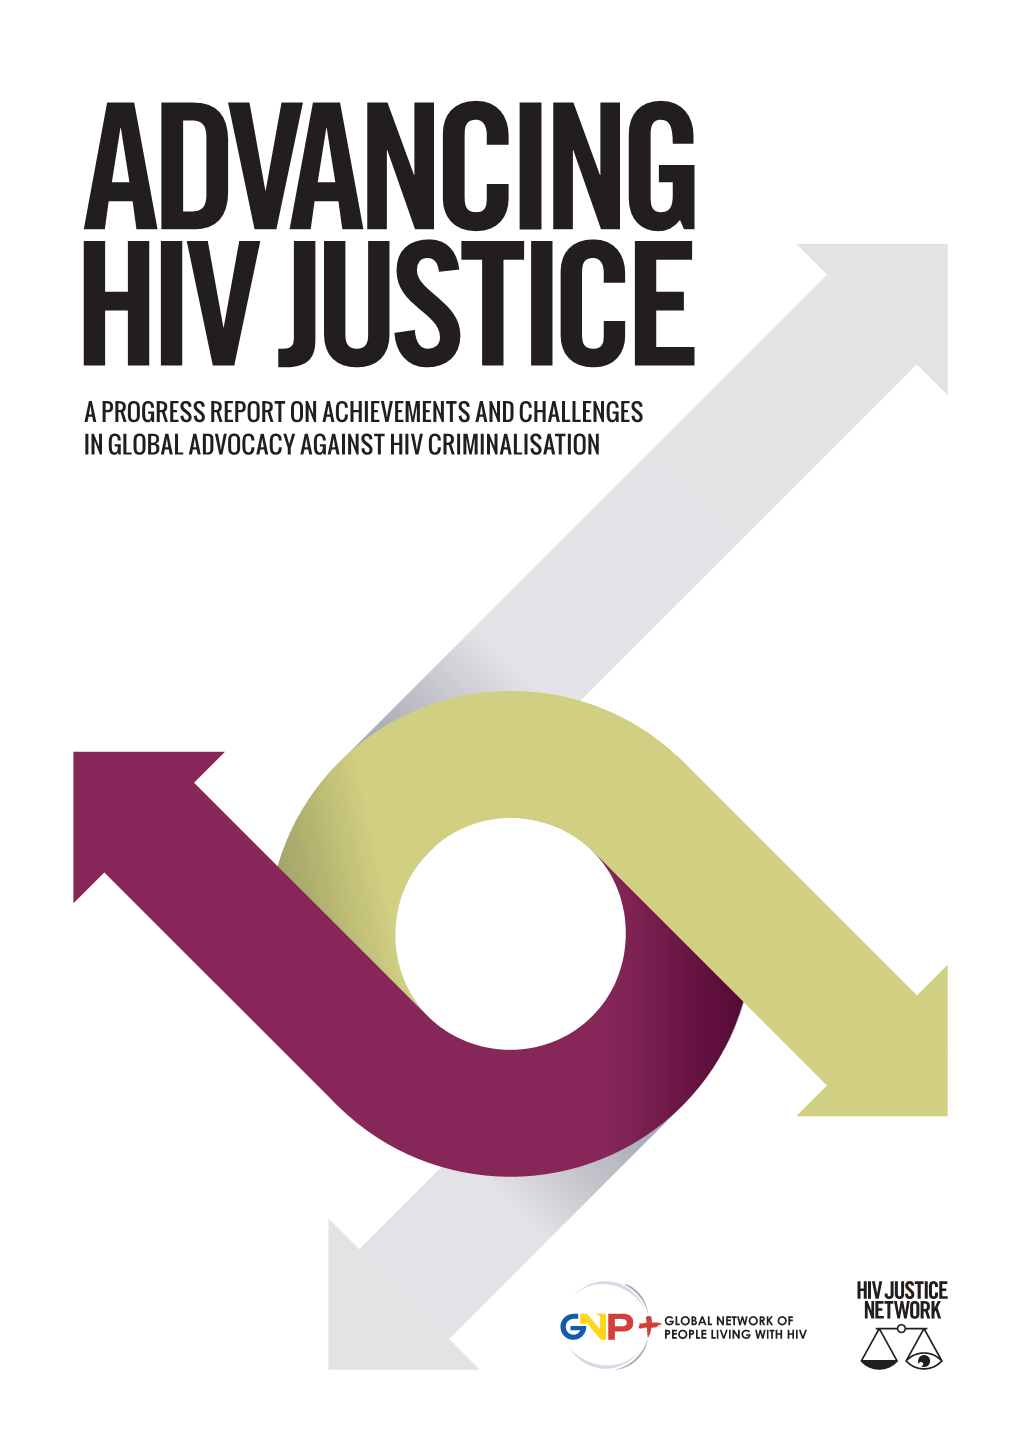 A Progress Report on Achievements and Challenges in Global Advocacy Against Hiv Criminalisation 2 Advancing Hiv Justice 1